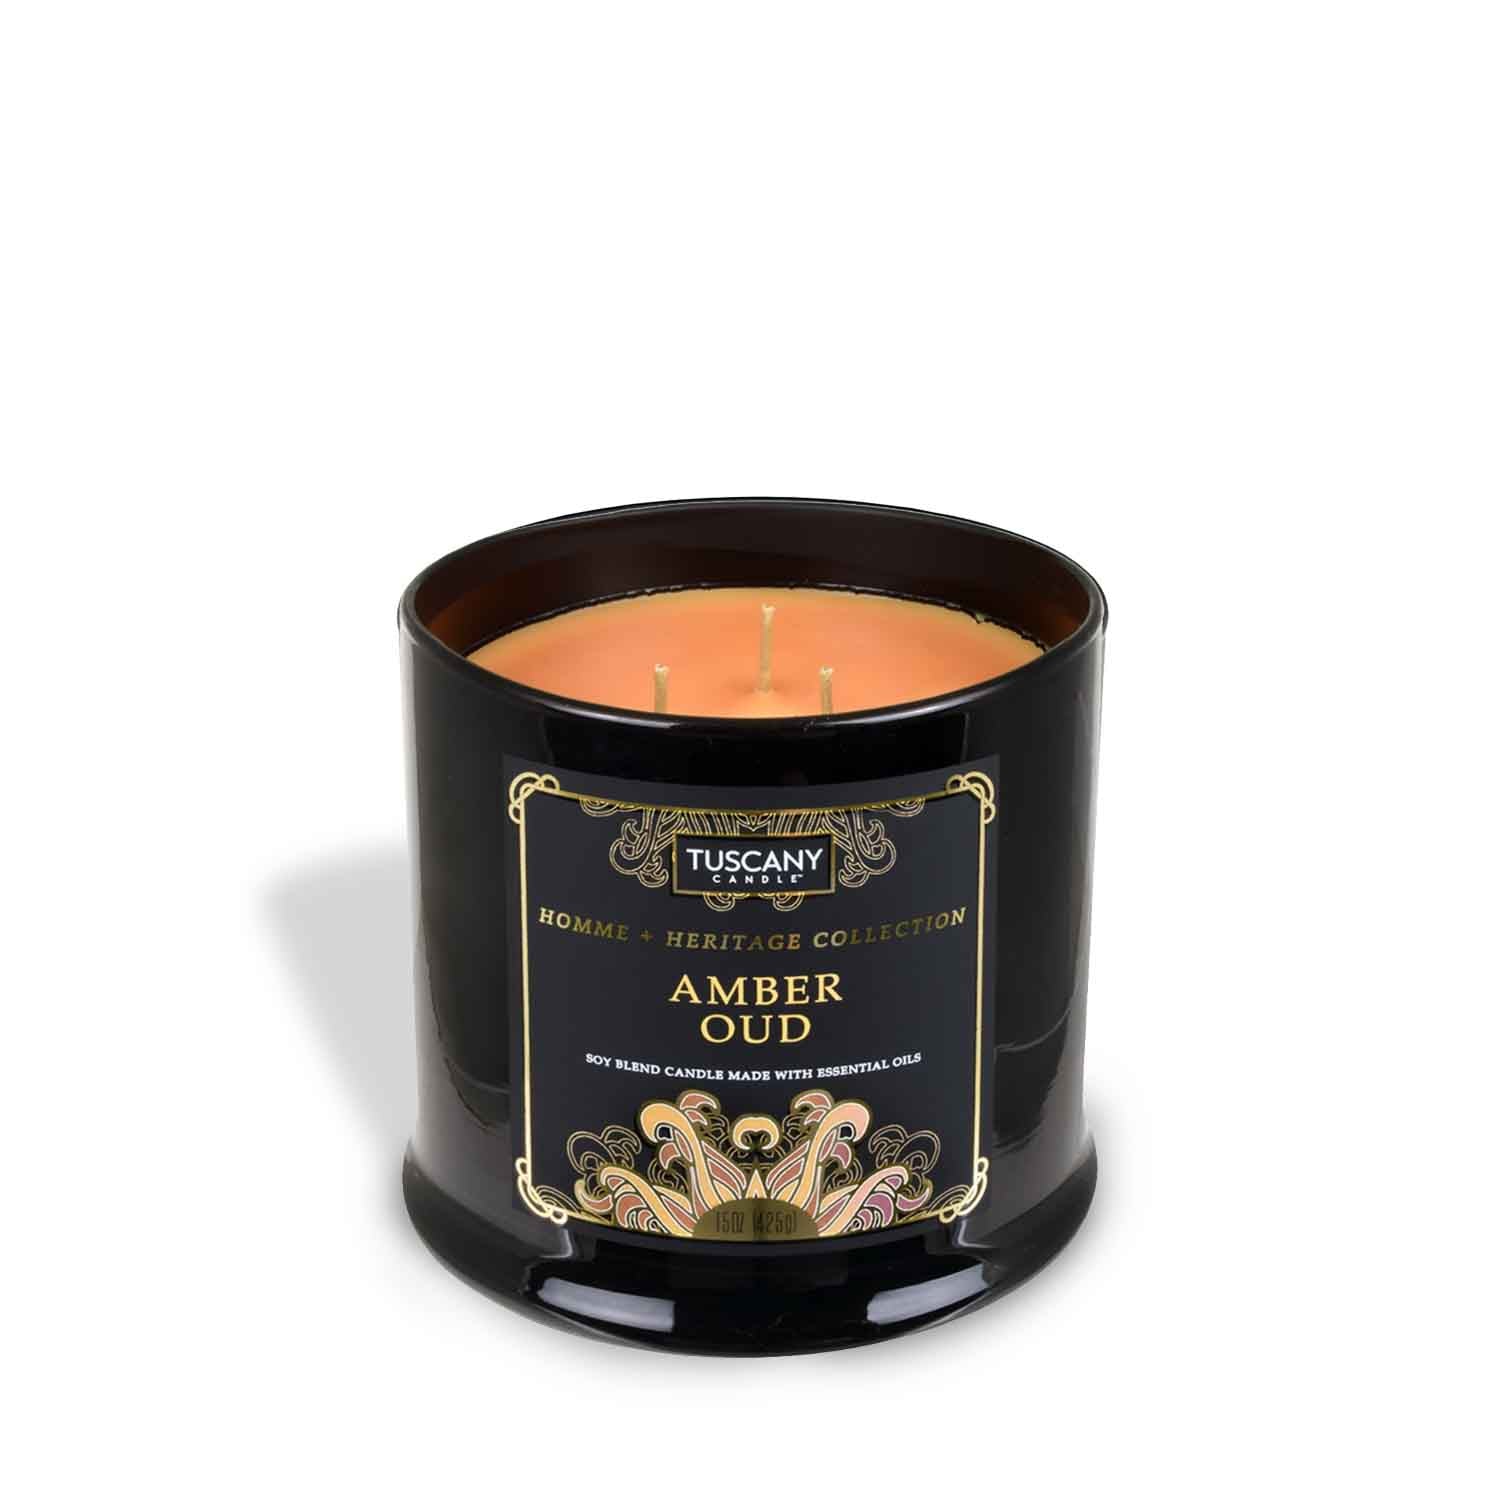 An Amber Oud scented candle in a black tin with a gold lid from the Tuscany Candle brand.